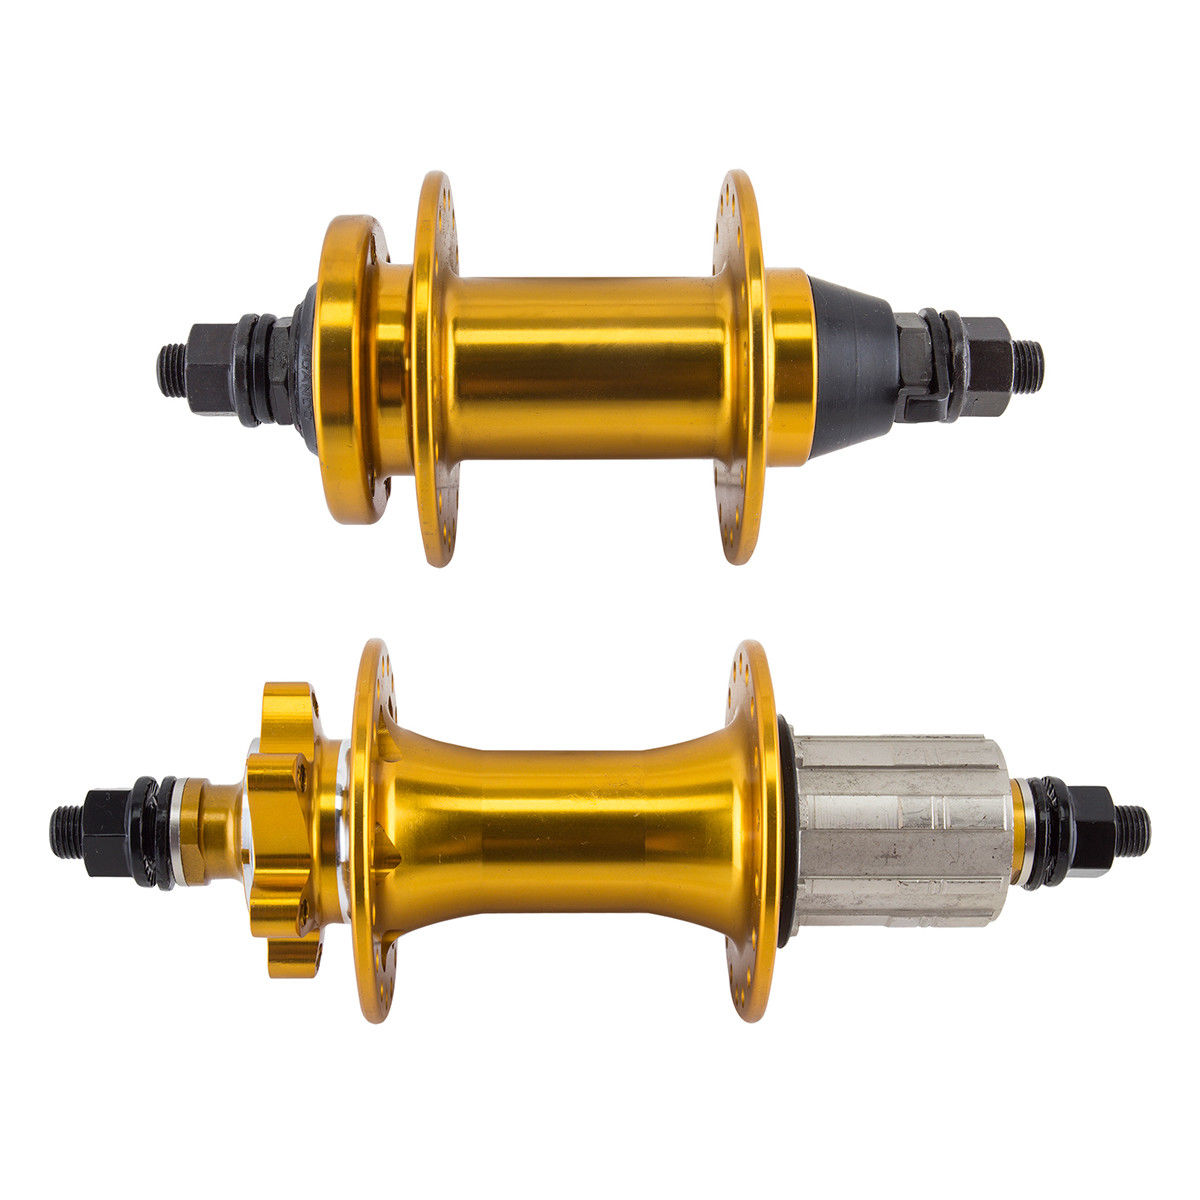 SE Racing OM Duro Hubset - 3/8" axles - 36H - 110/148mm 8-10spd - Gold Anodized